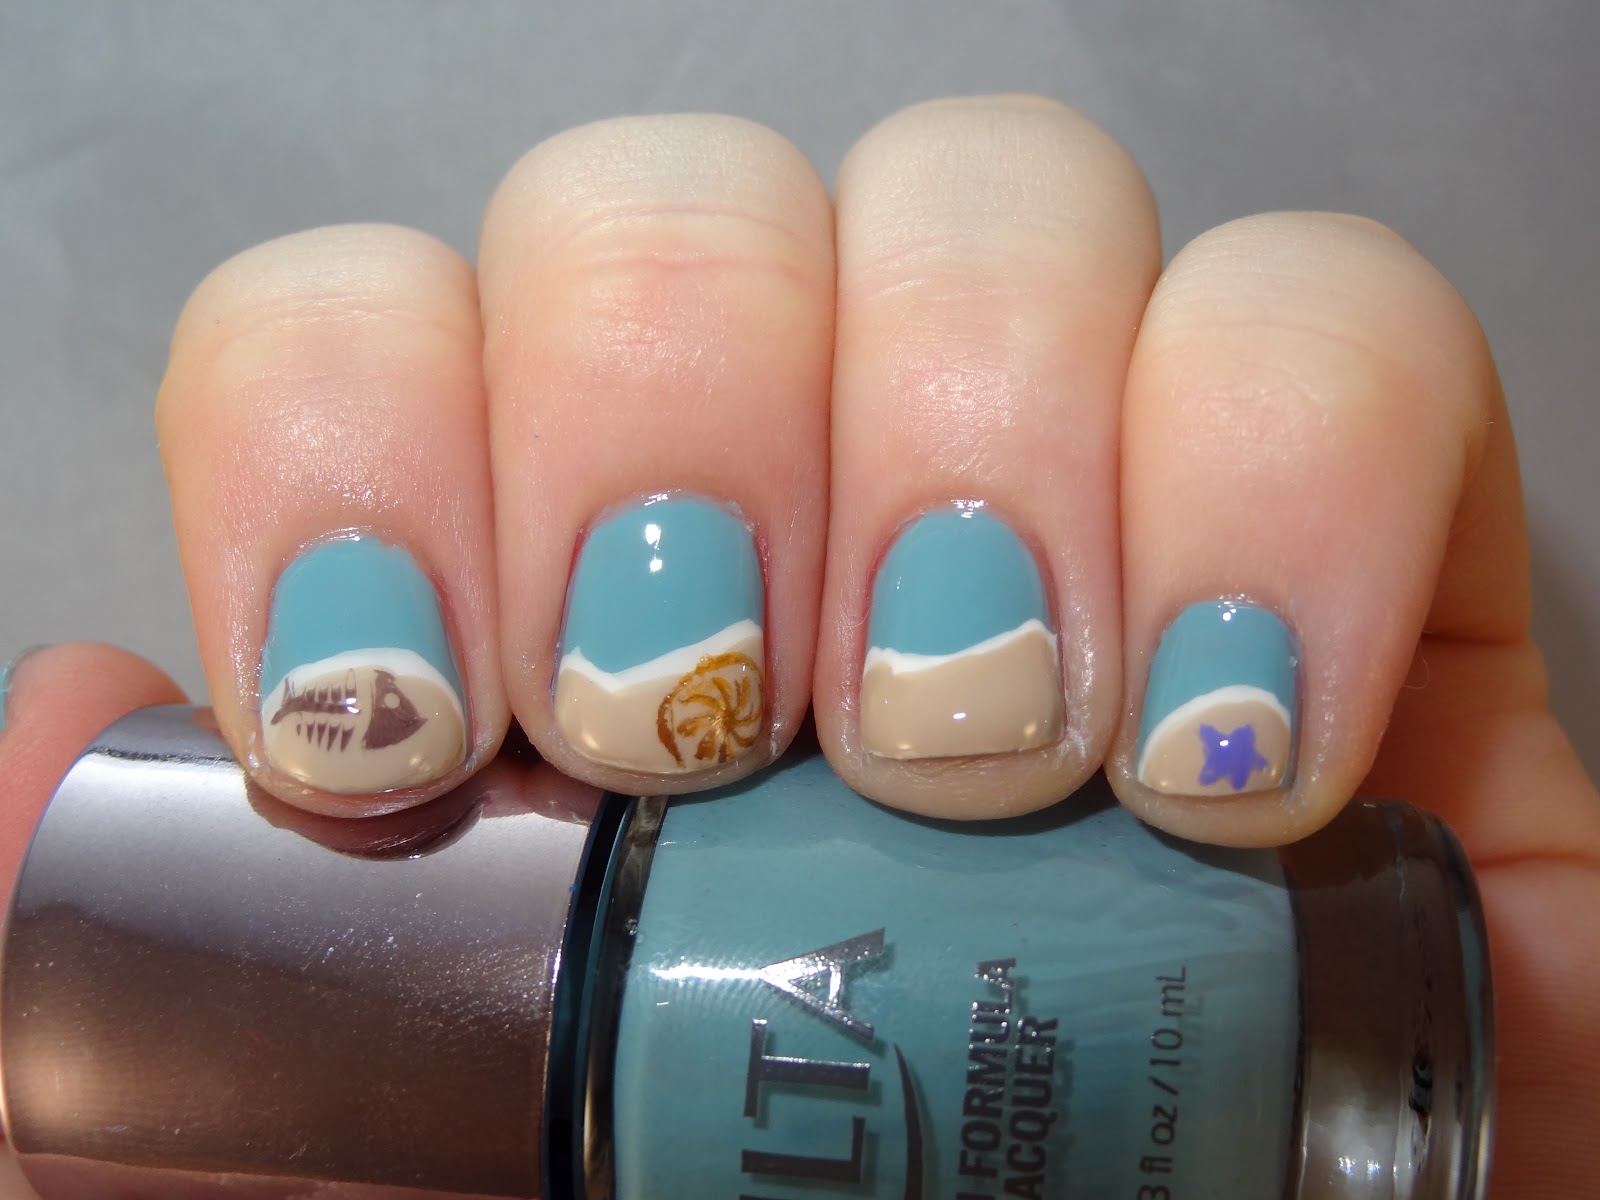 7. Sand Dollar Nails - wide 2